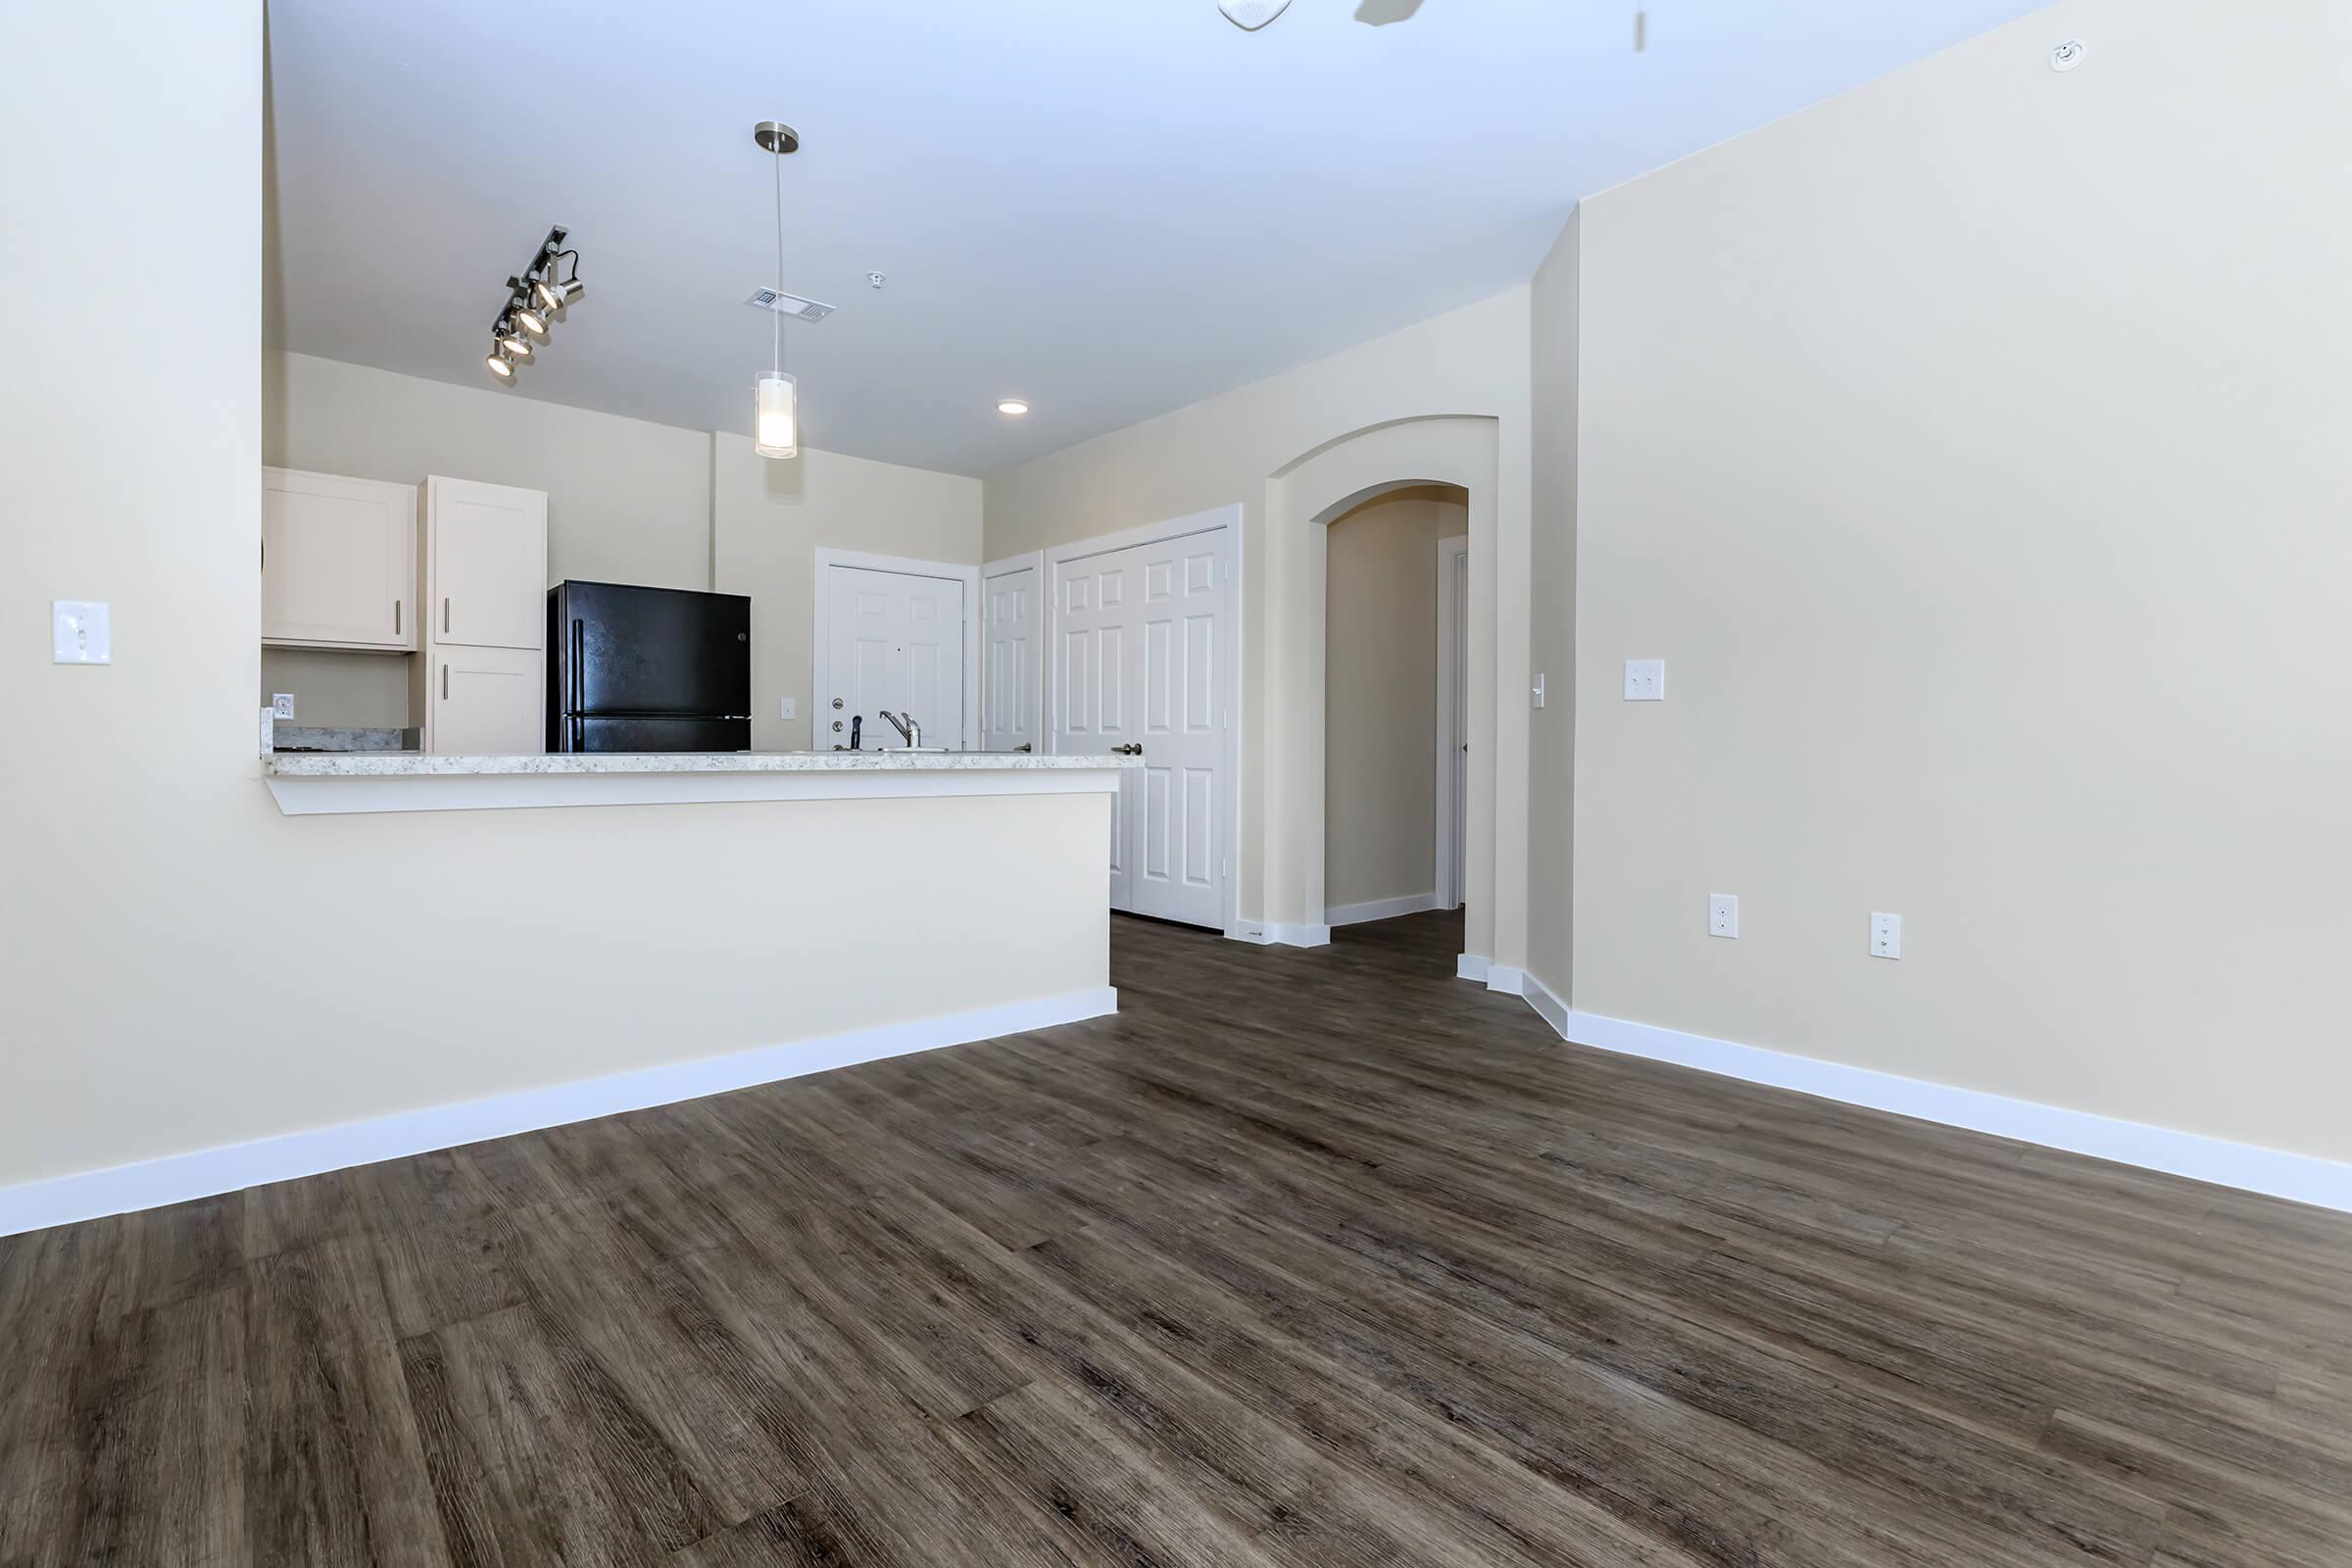 Apartments for Rent in Leander TX - Hills at Leander Spacious Floor Plans with Plenty of Features and Fully Equipped with Kitchens, and Much More